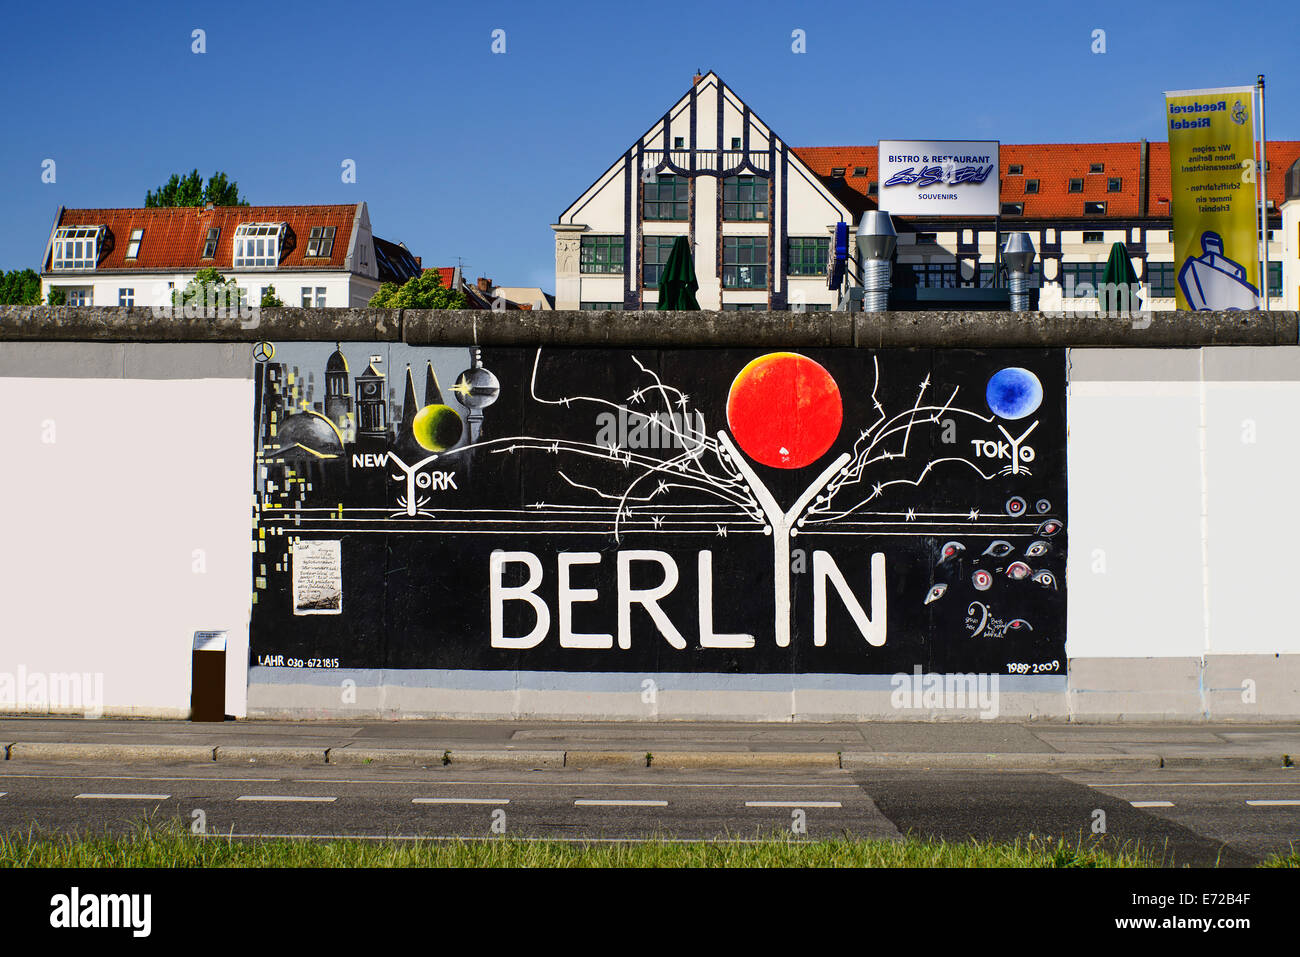 Germany, Berlin, The East Side Gallery a 1.3 km long section of the Berlin  Wall mural with the word Berlin prominently displayed Stock Photo - Alamy